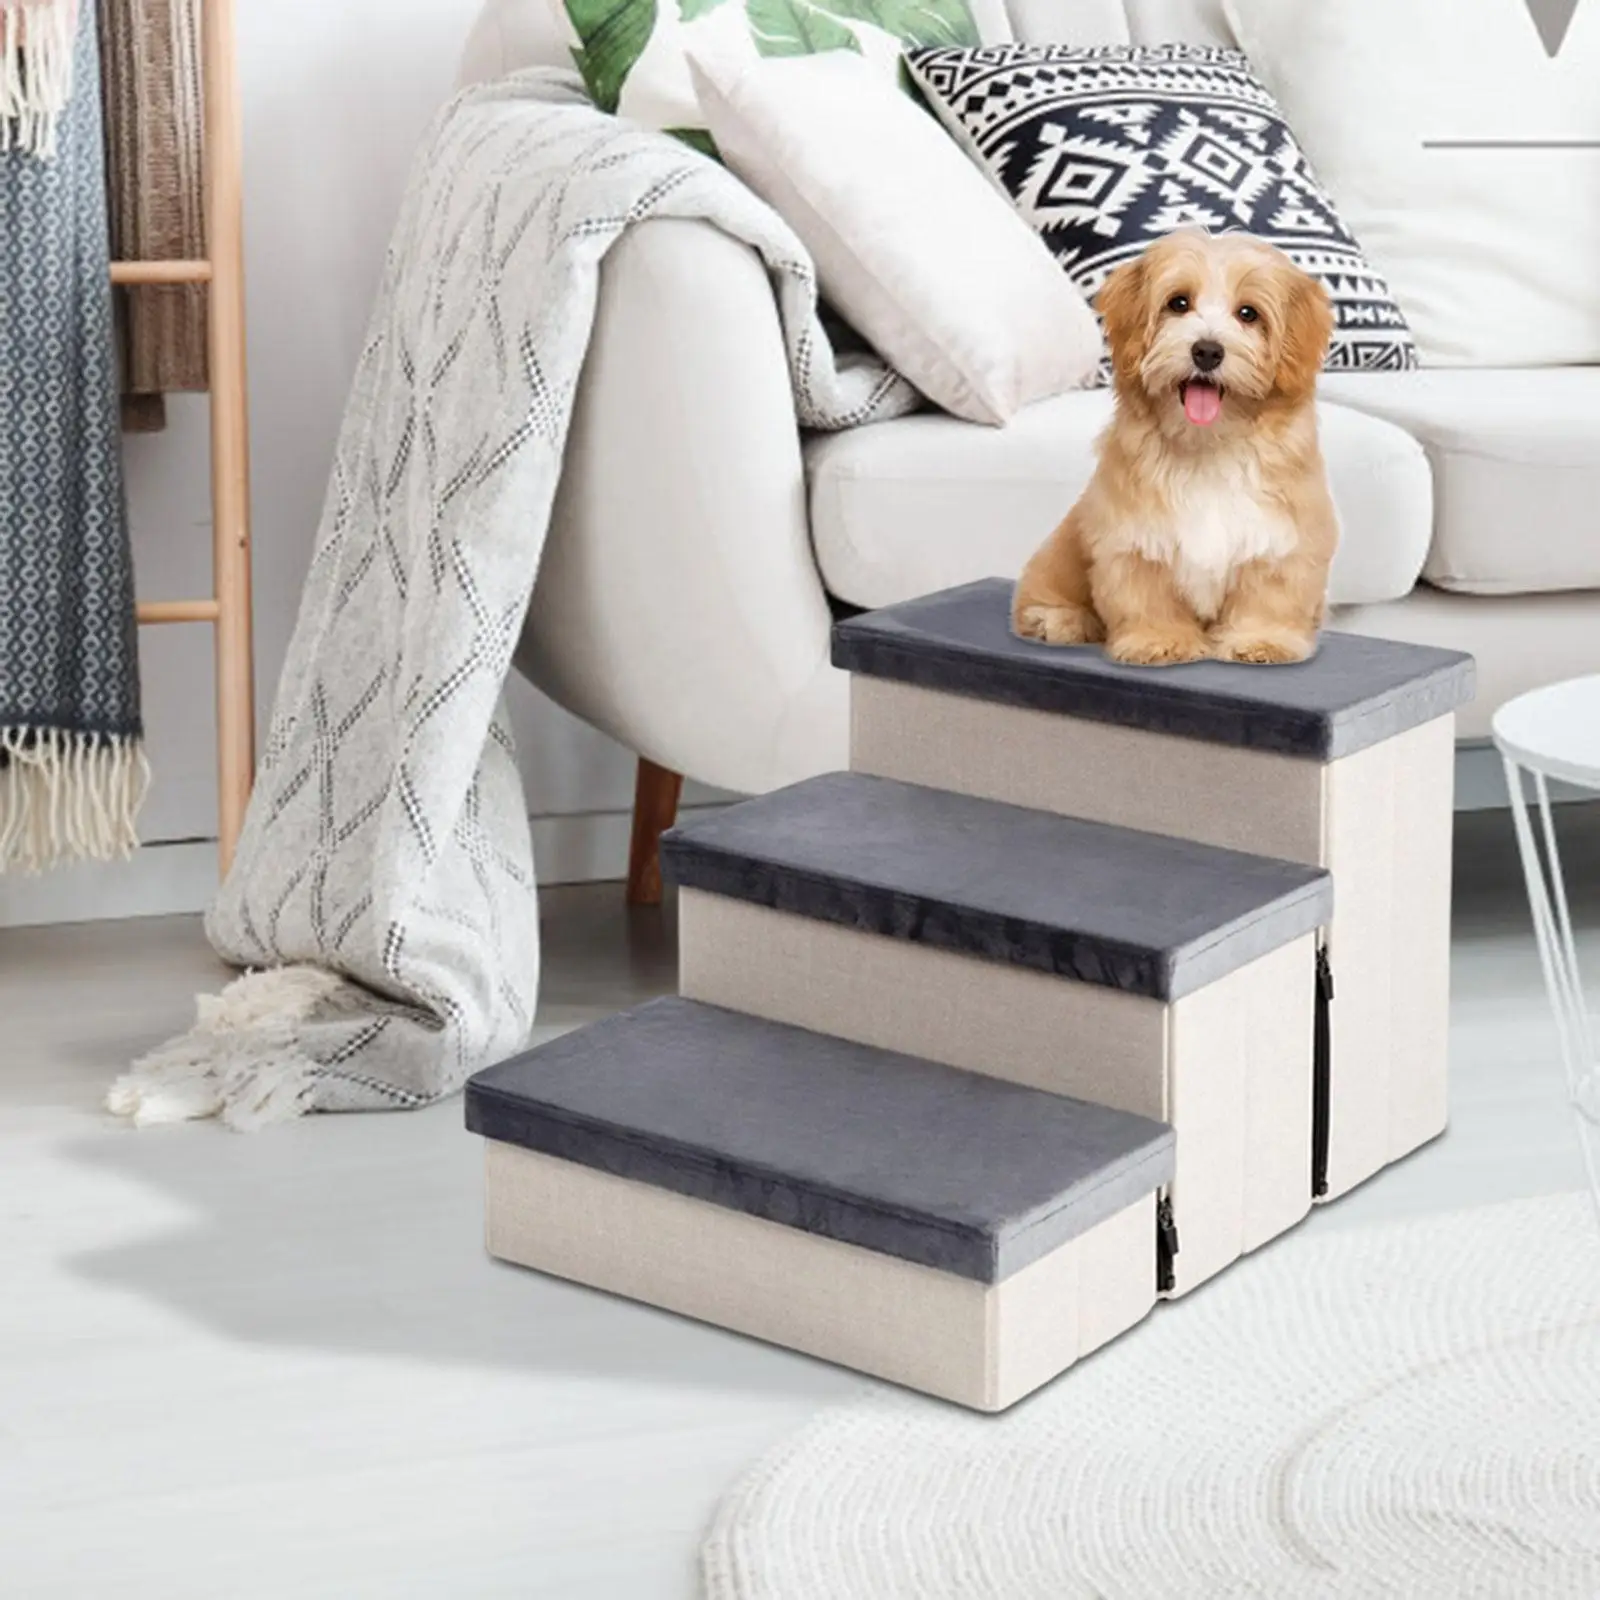 3 Step Dog Stairs Pet Steps Washable Cover Pet Stairs Ramp Pet Ladder with Storage Box Pet Storage Stepper for Couch Indoor Bed